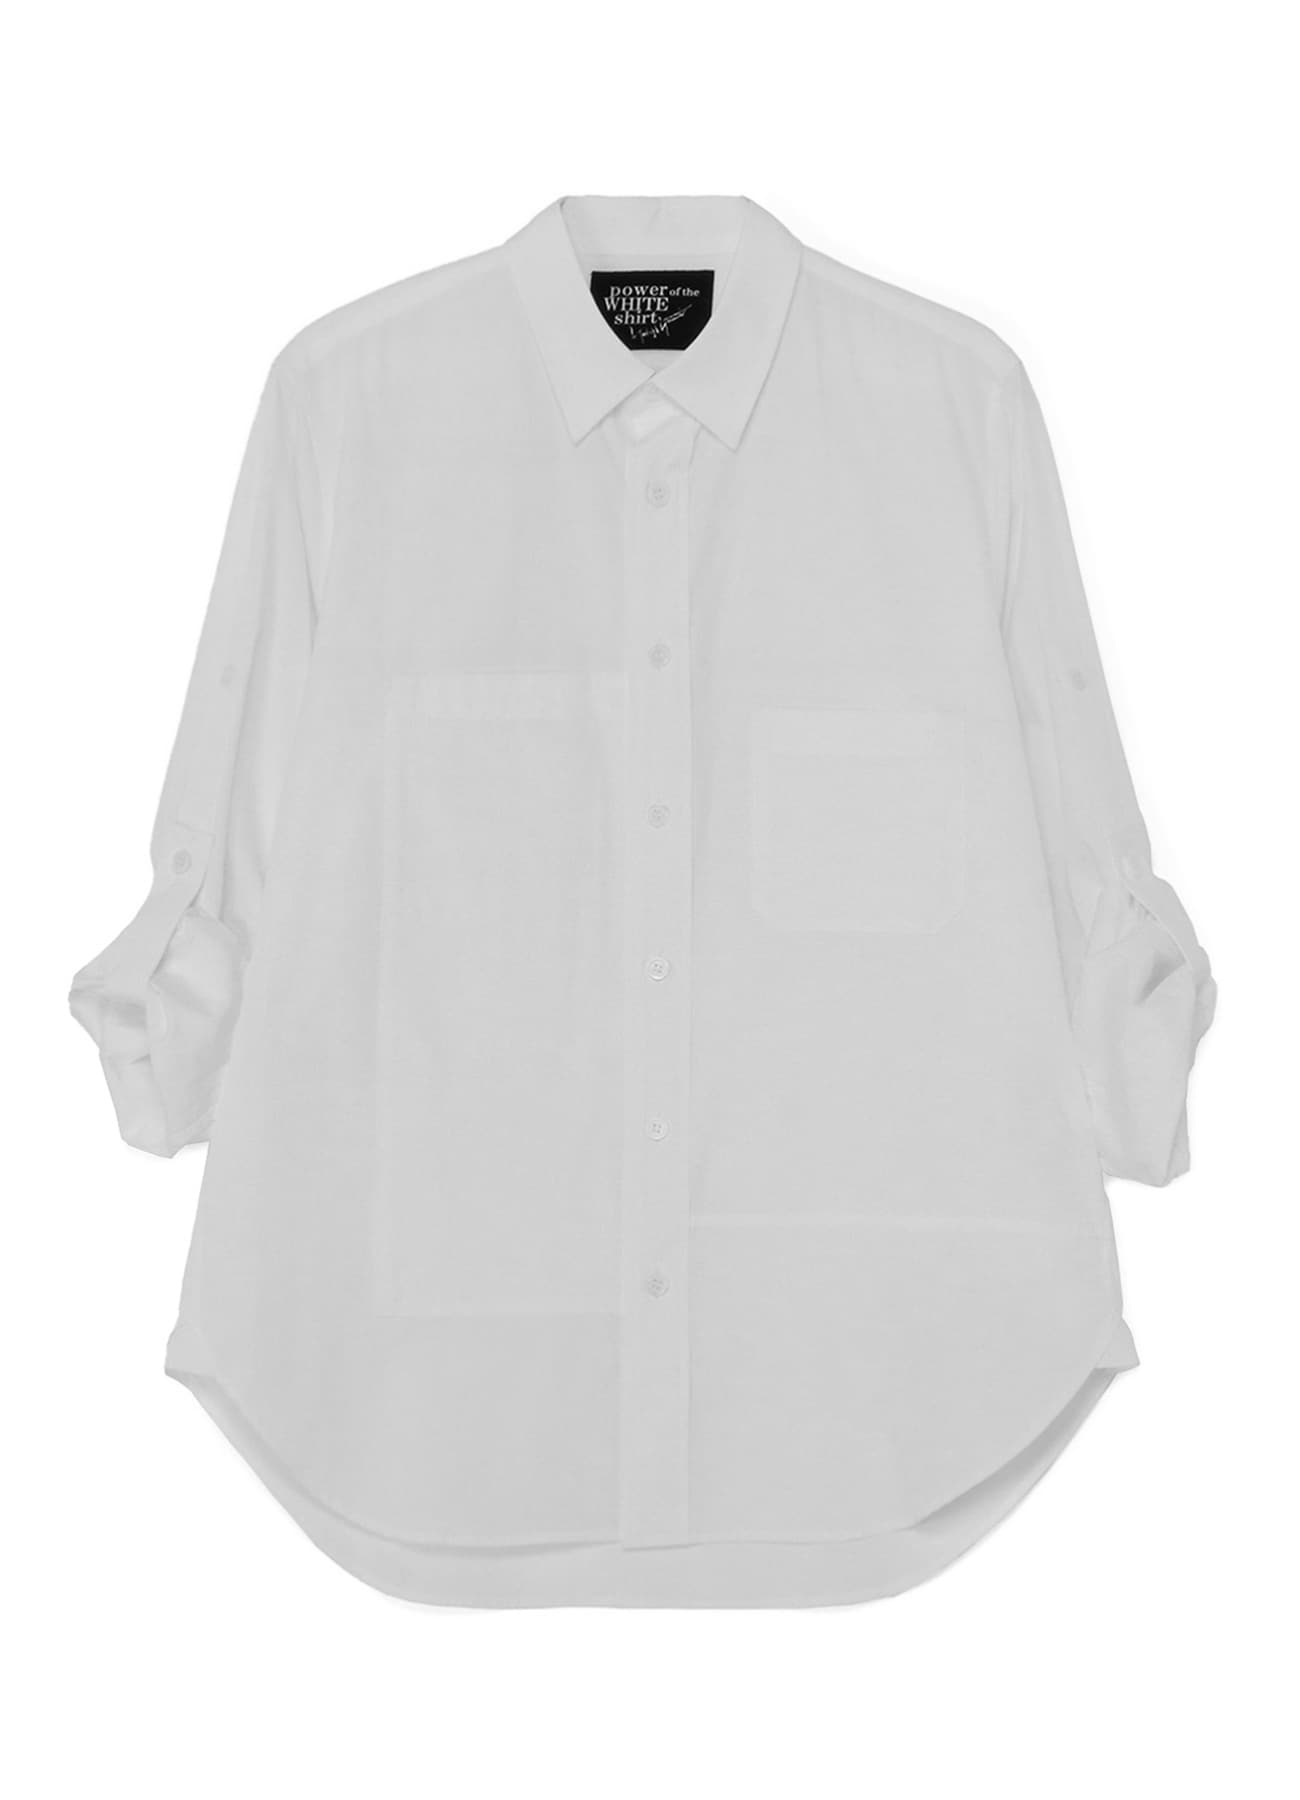 100/2 COTTON BROADCLOTH SHIRT WITH ADJUSTABLE SLEEVES